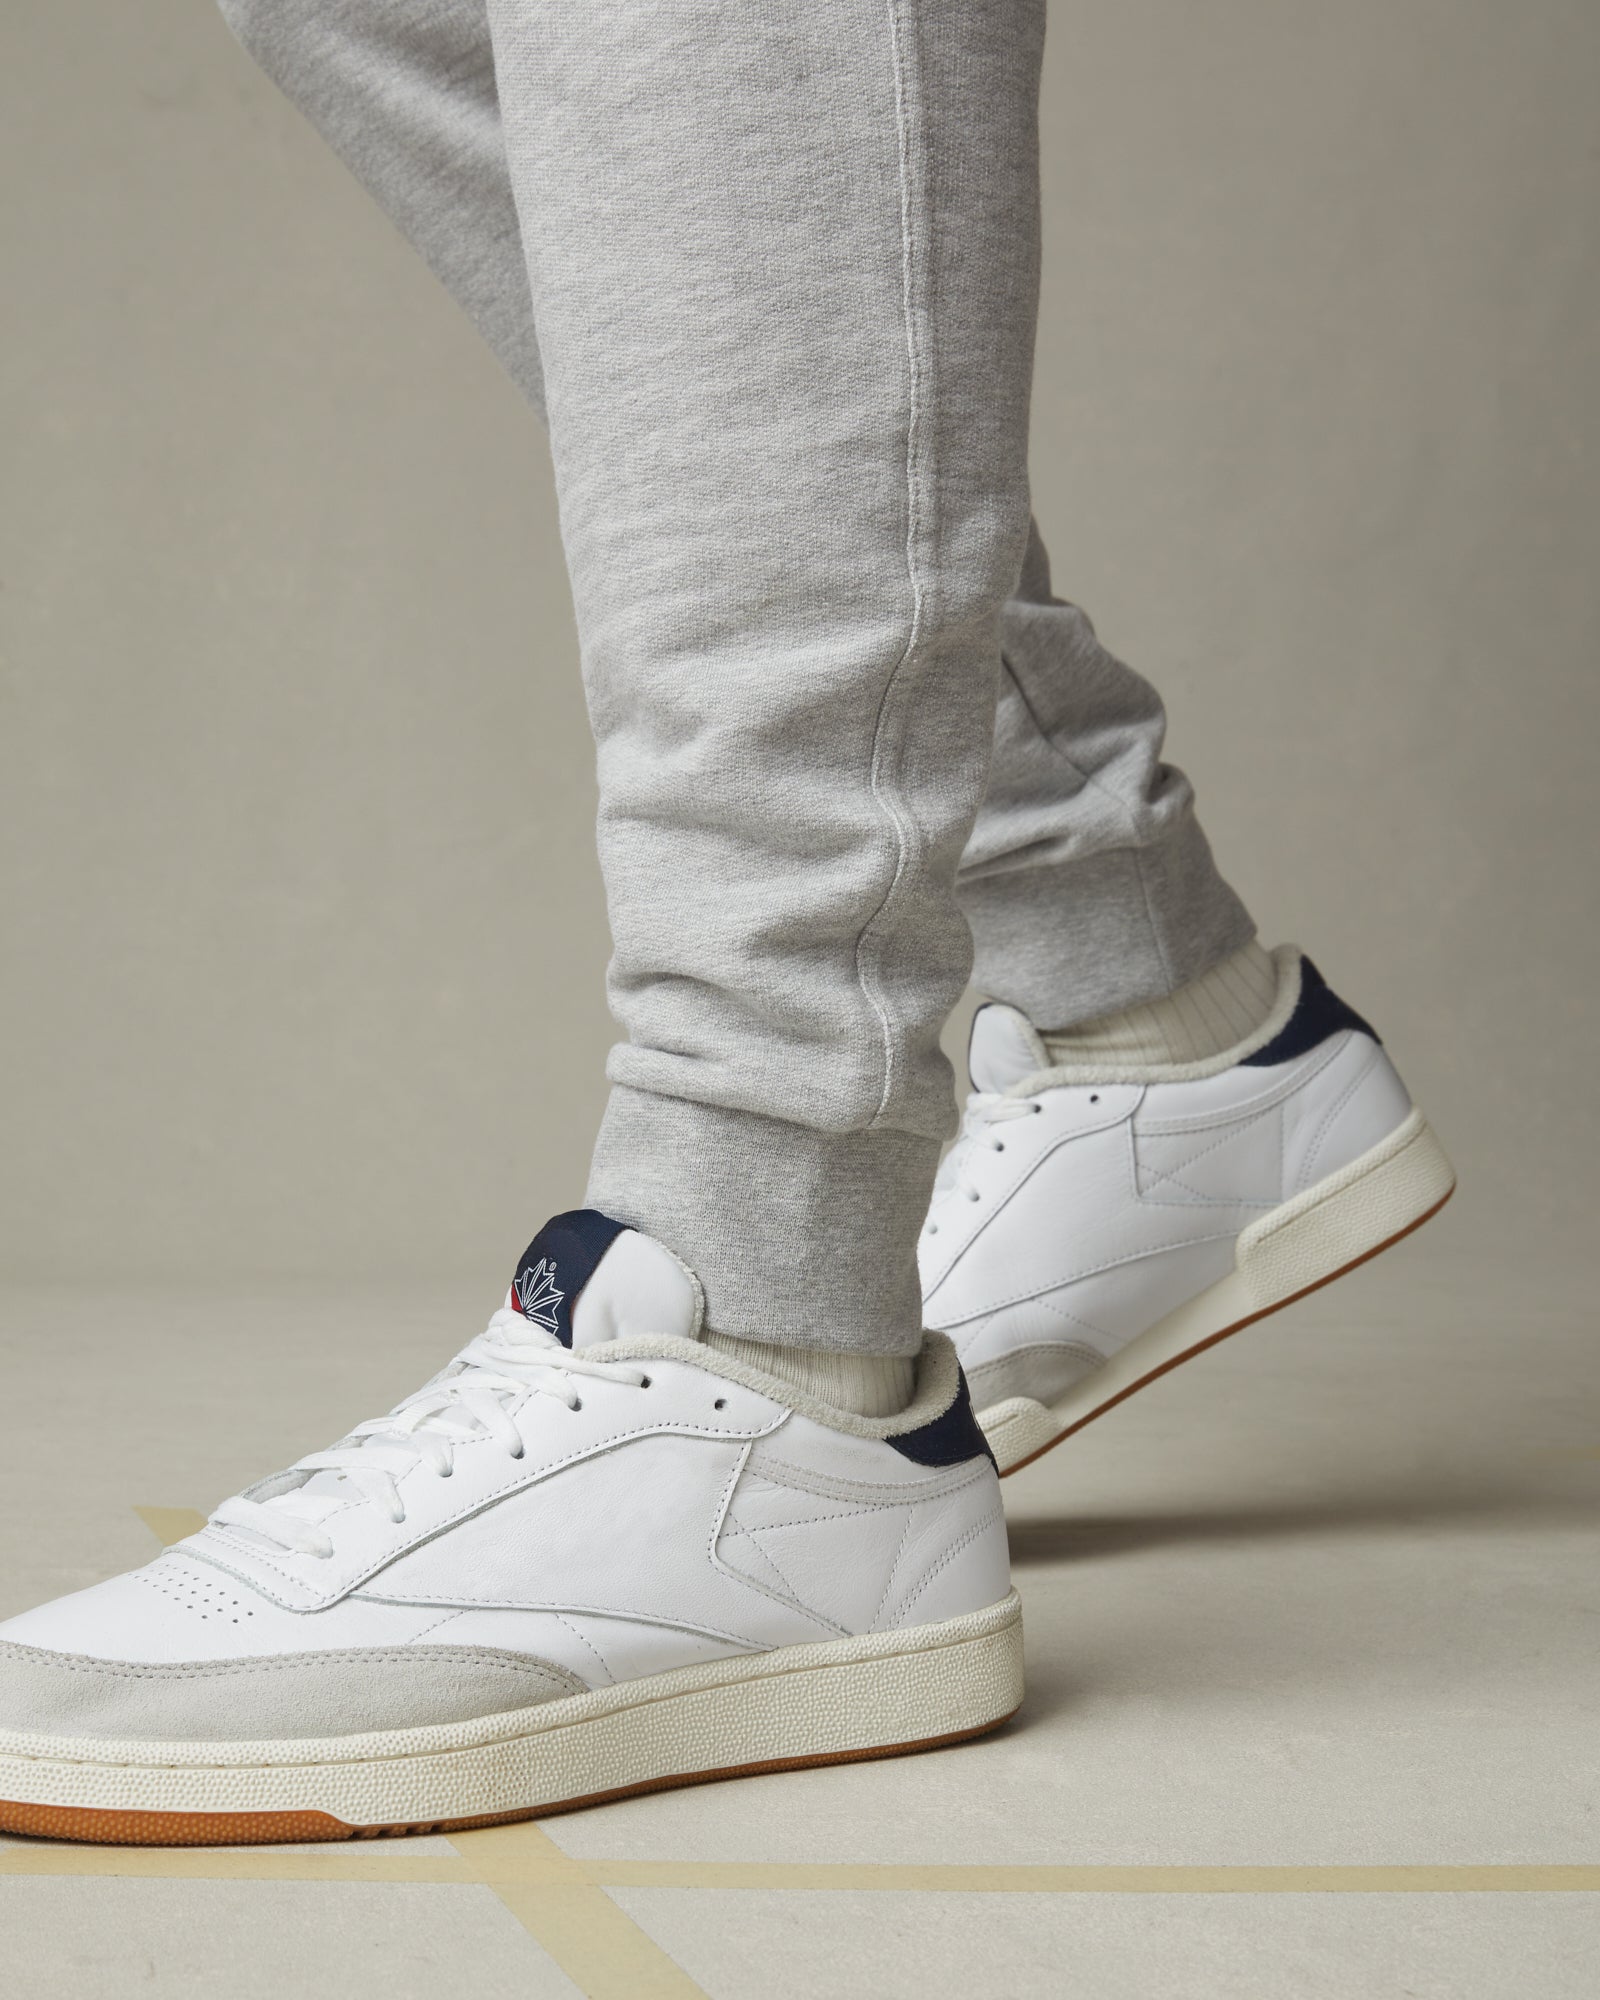 French Terry Jogger - Ash Heather